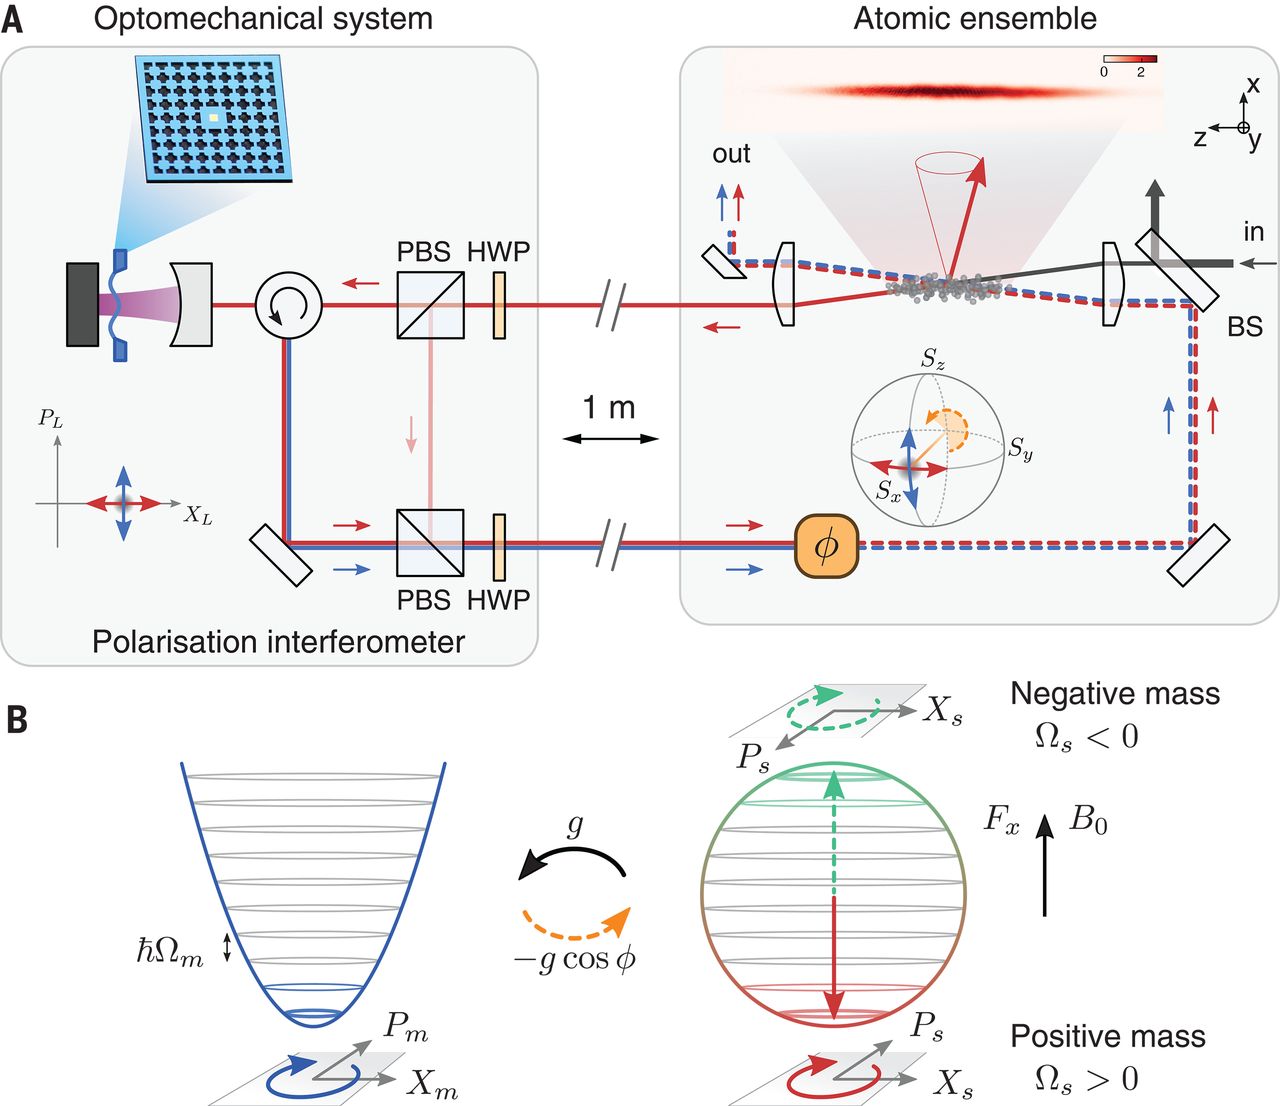 Gentle-mediated sturdy coupling between a mechanical oscillator and atomic spins 1 meter apart